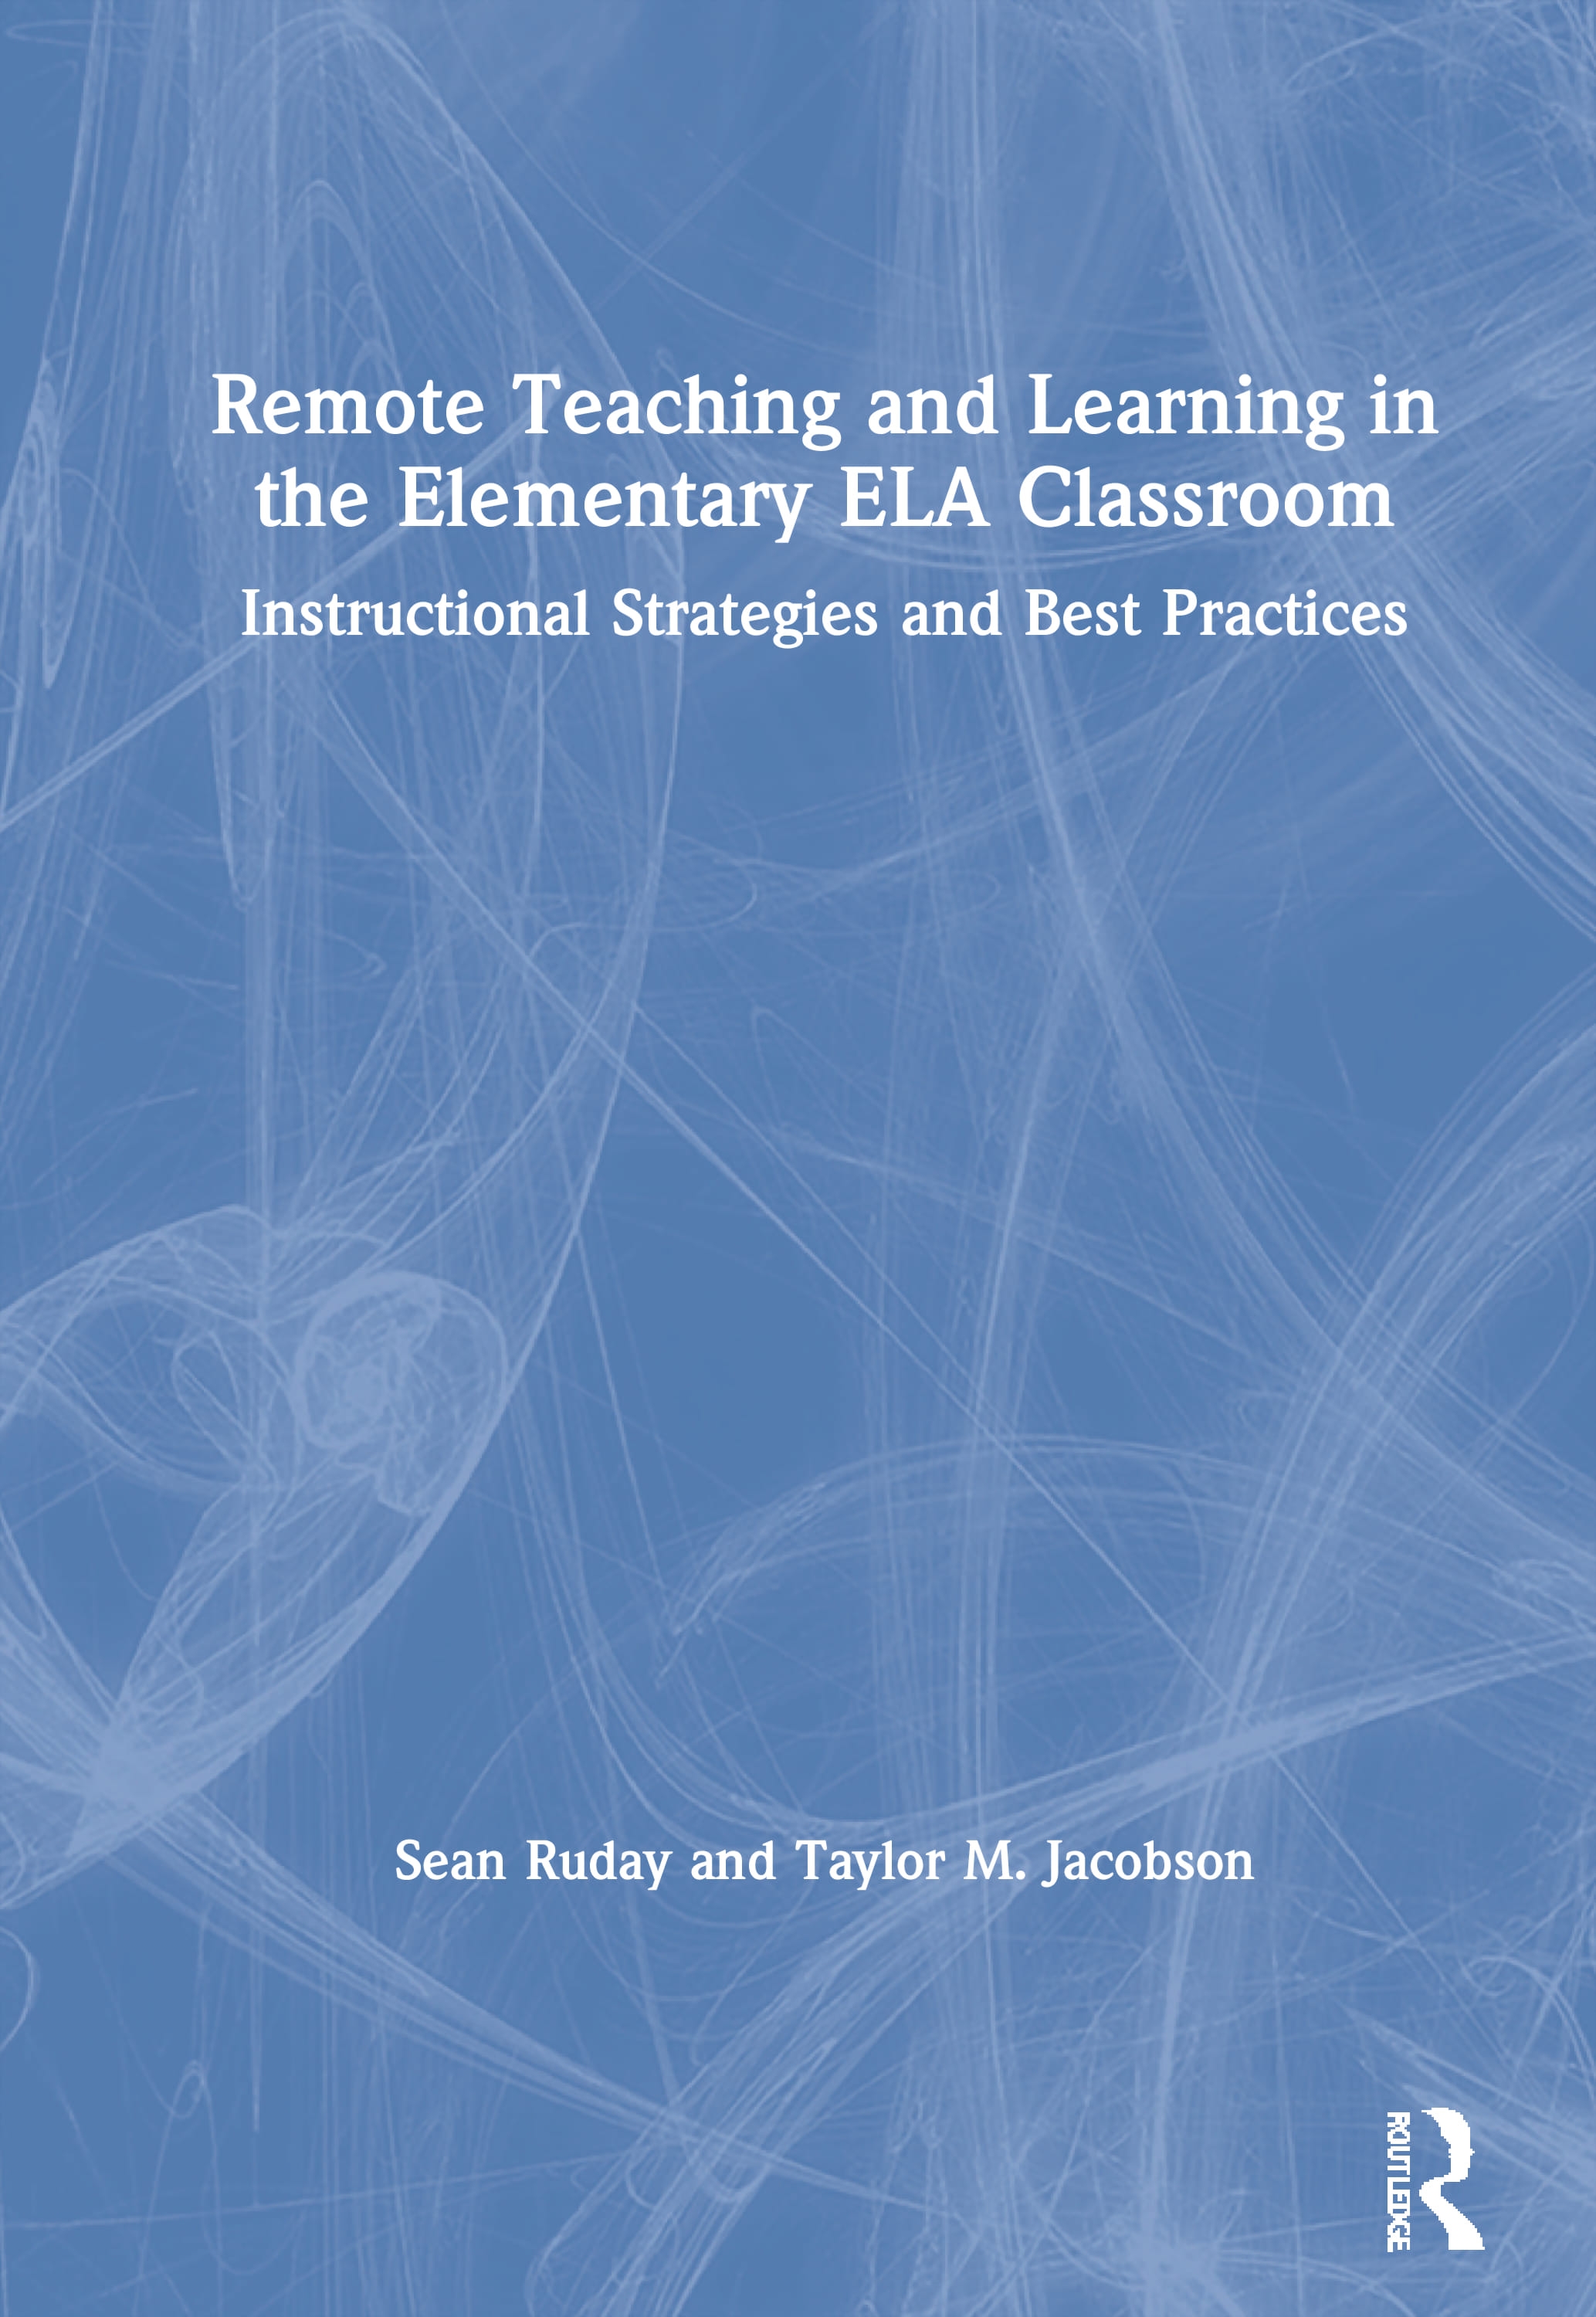 Remote Teaching and Learning in the Elementary Ela Classroom: Instructional Strategies and Best Practices